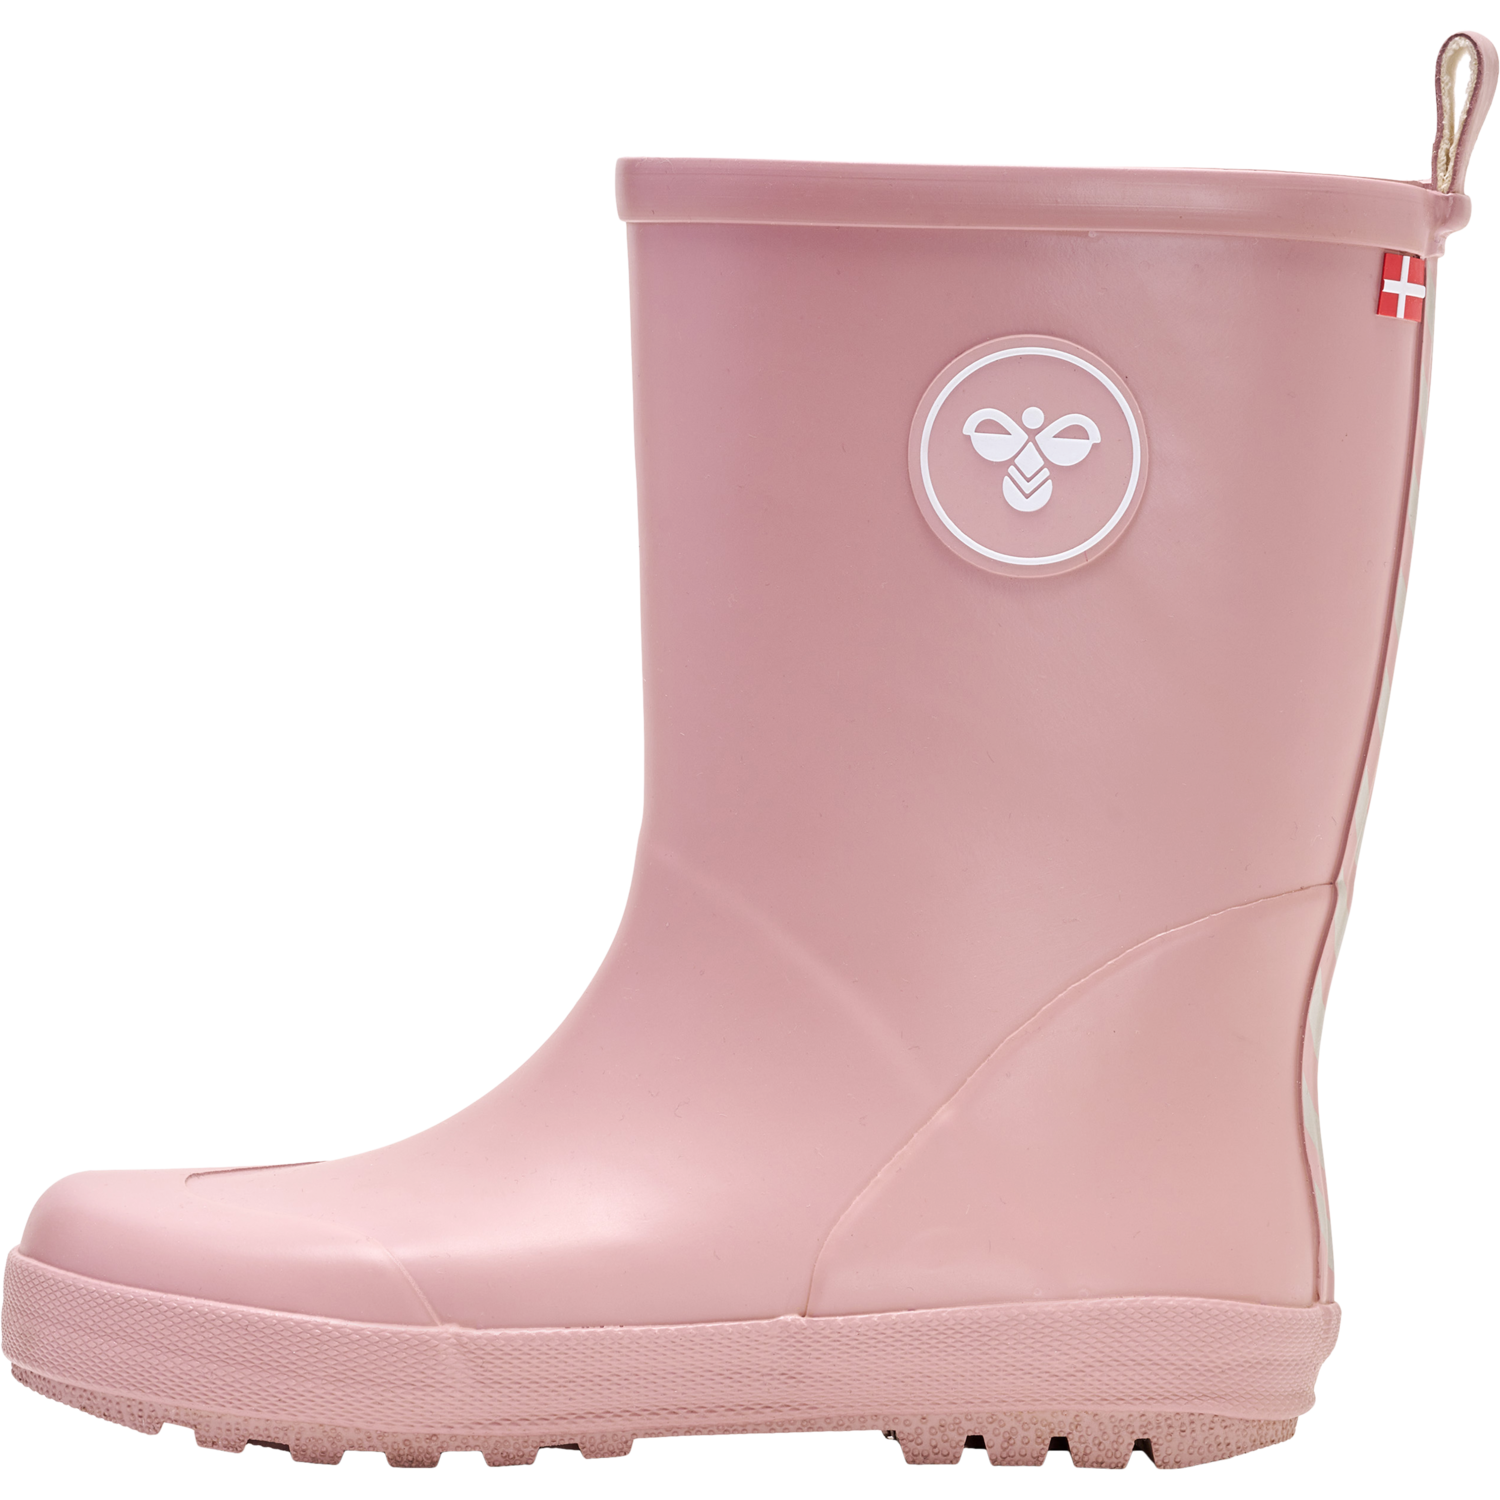 38 BRAND NEW GIRLS PINK RUBBER WELLIES sizes 13 - 5 32 